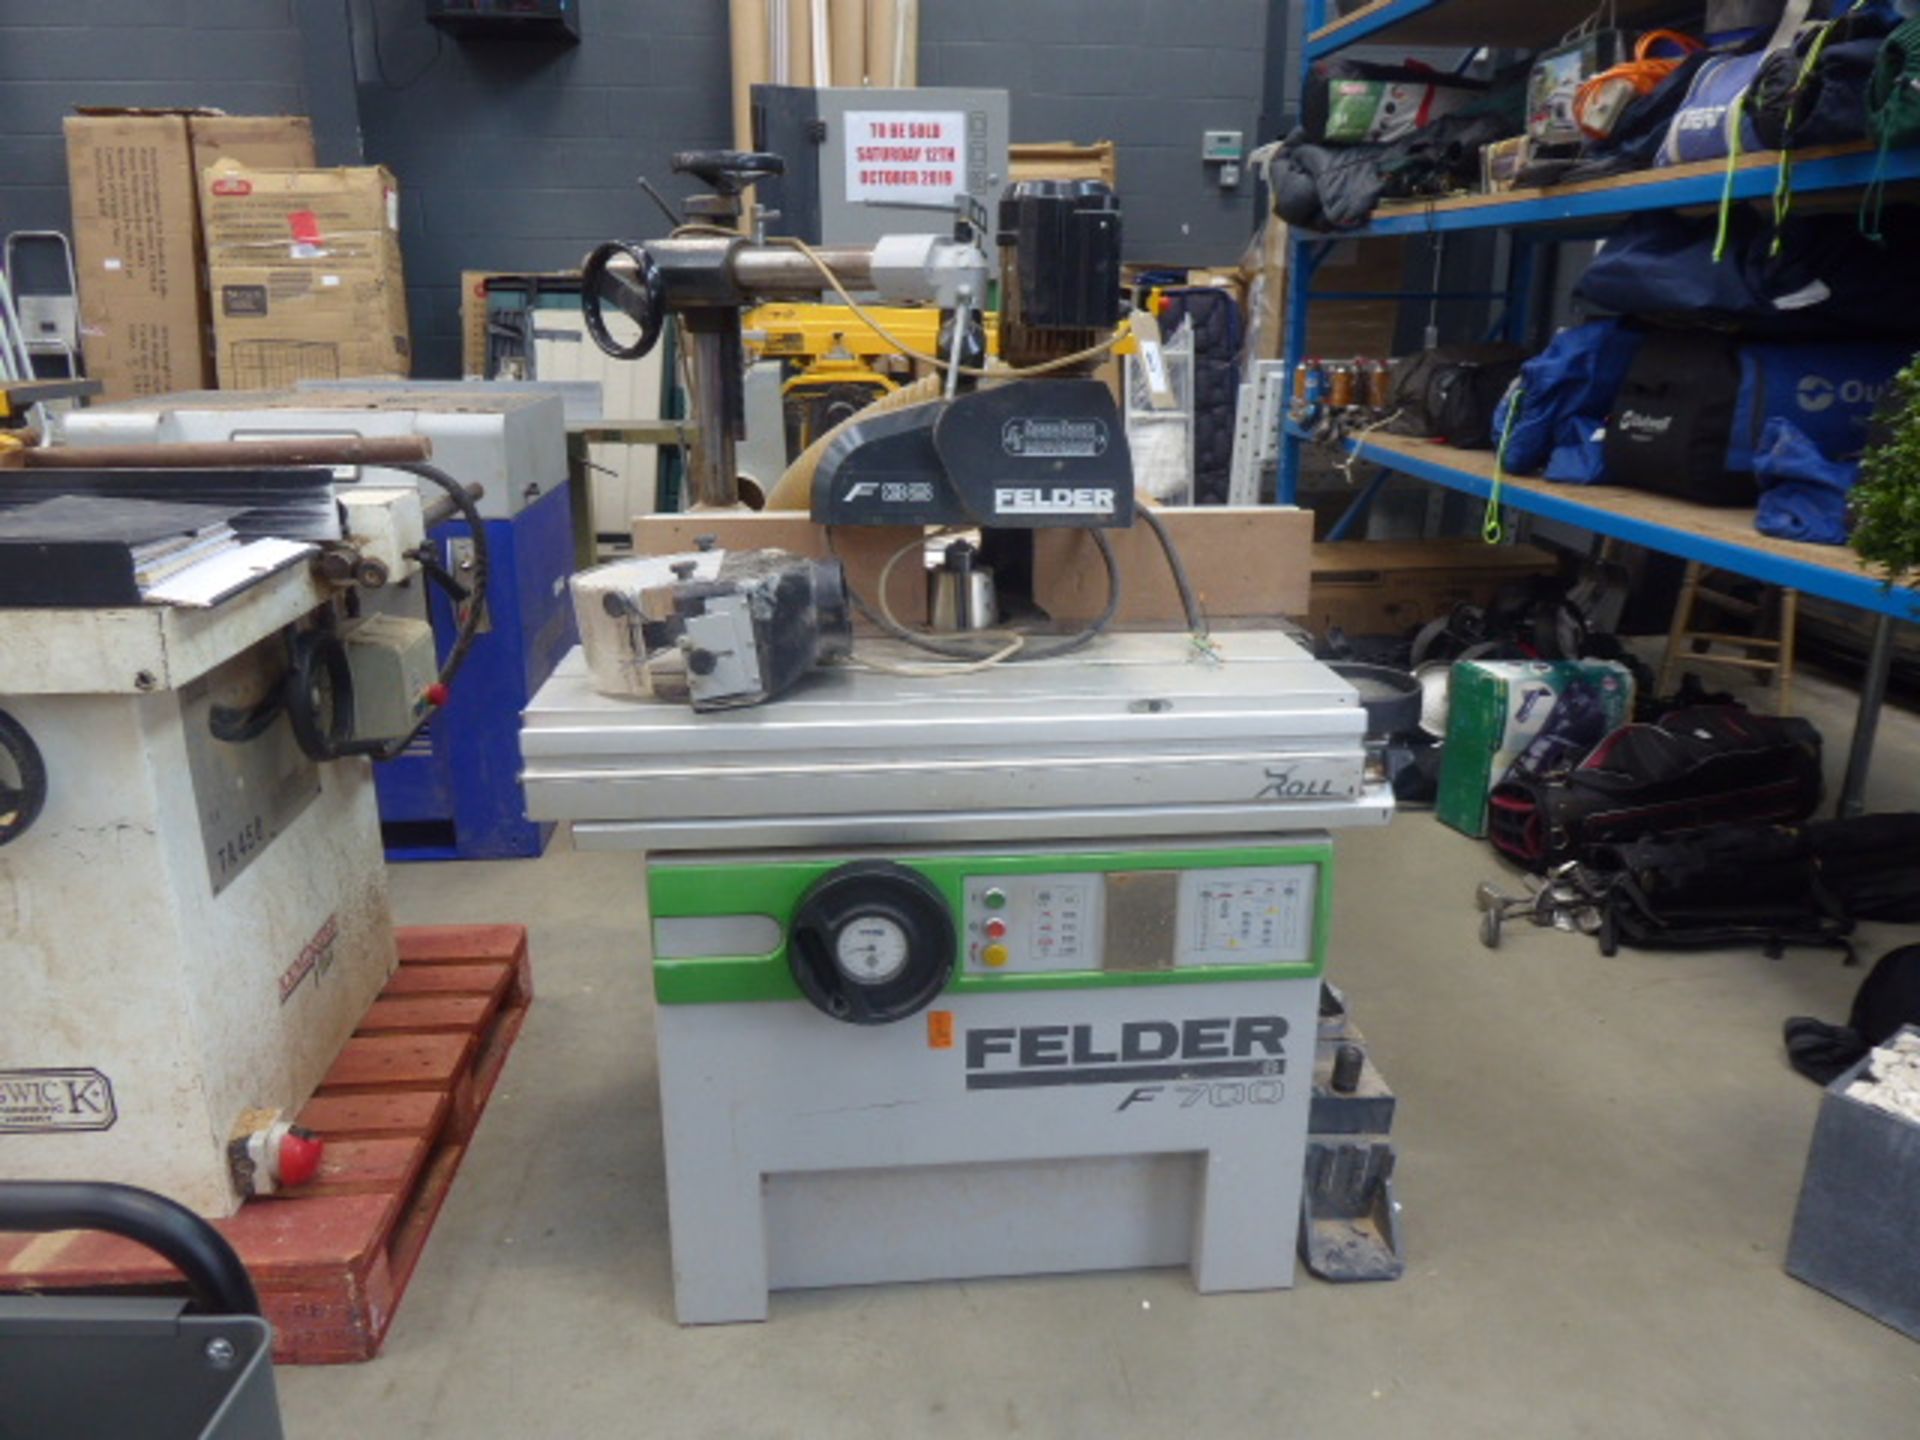 Felder F 700 Z/03 spindle moulder with sliding table and power feed Year: 2006 Serial Number: 422.